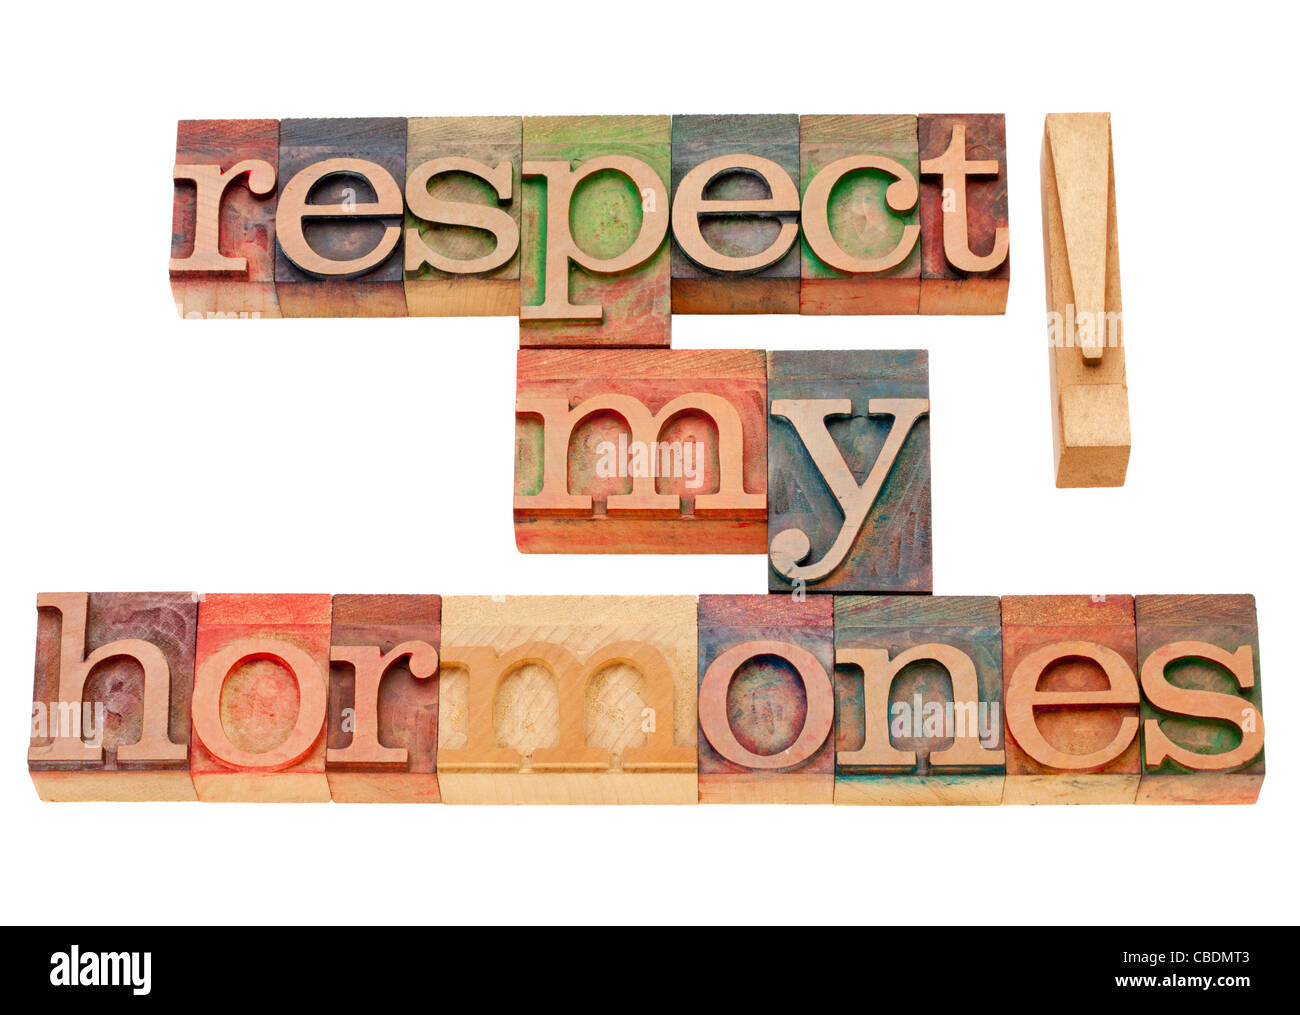 respect my hormones - warning concept - isolated text in vintage wood letterpress type Stock Photo